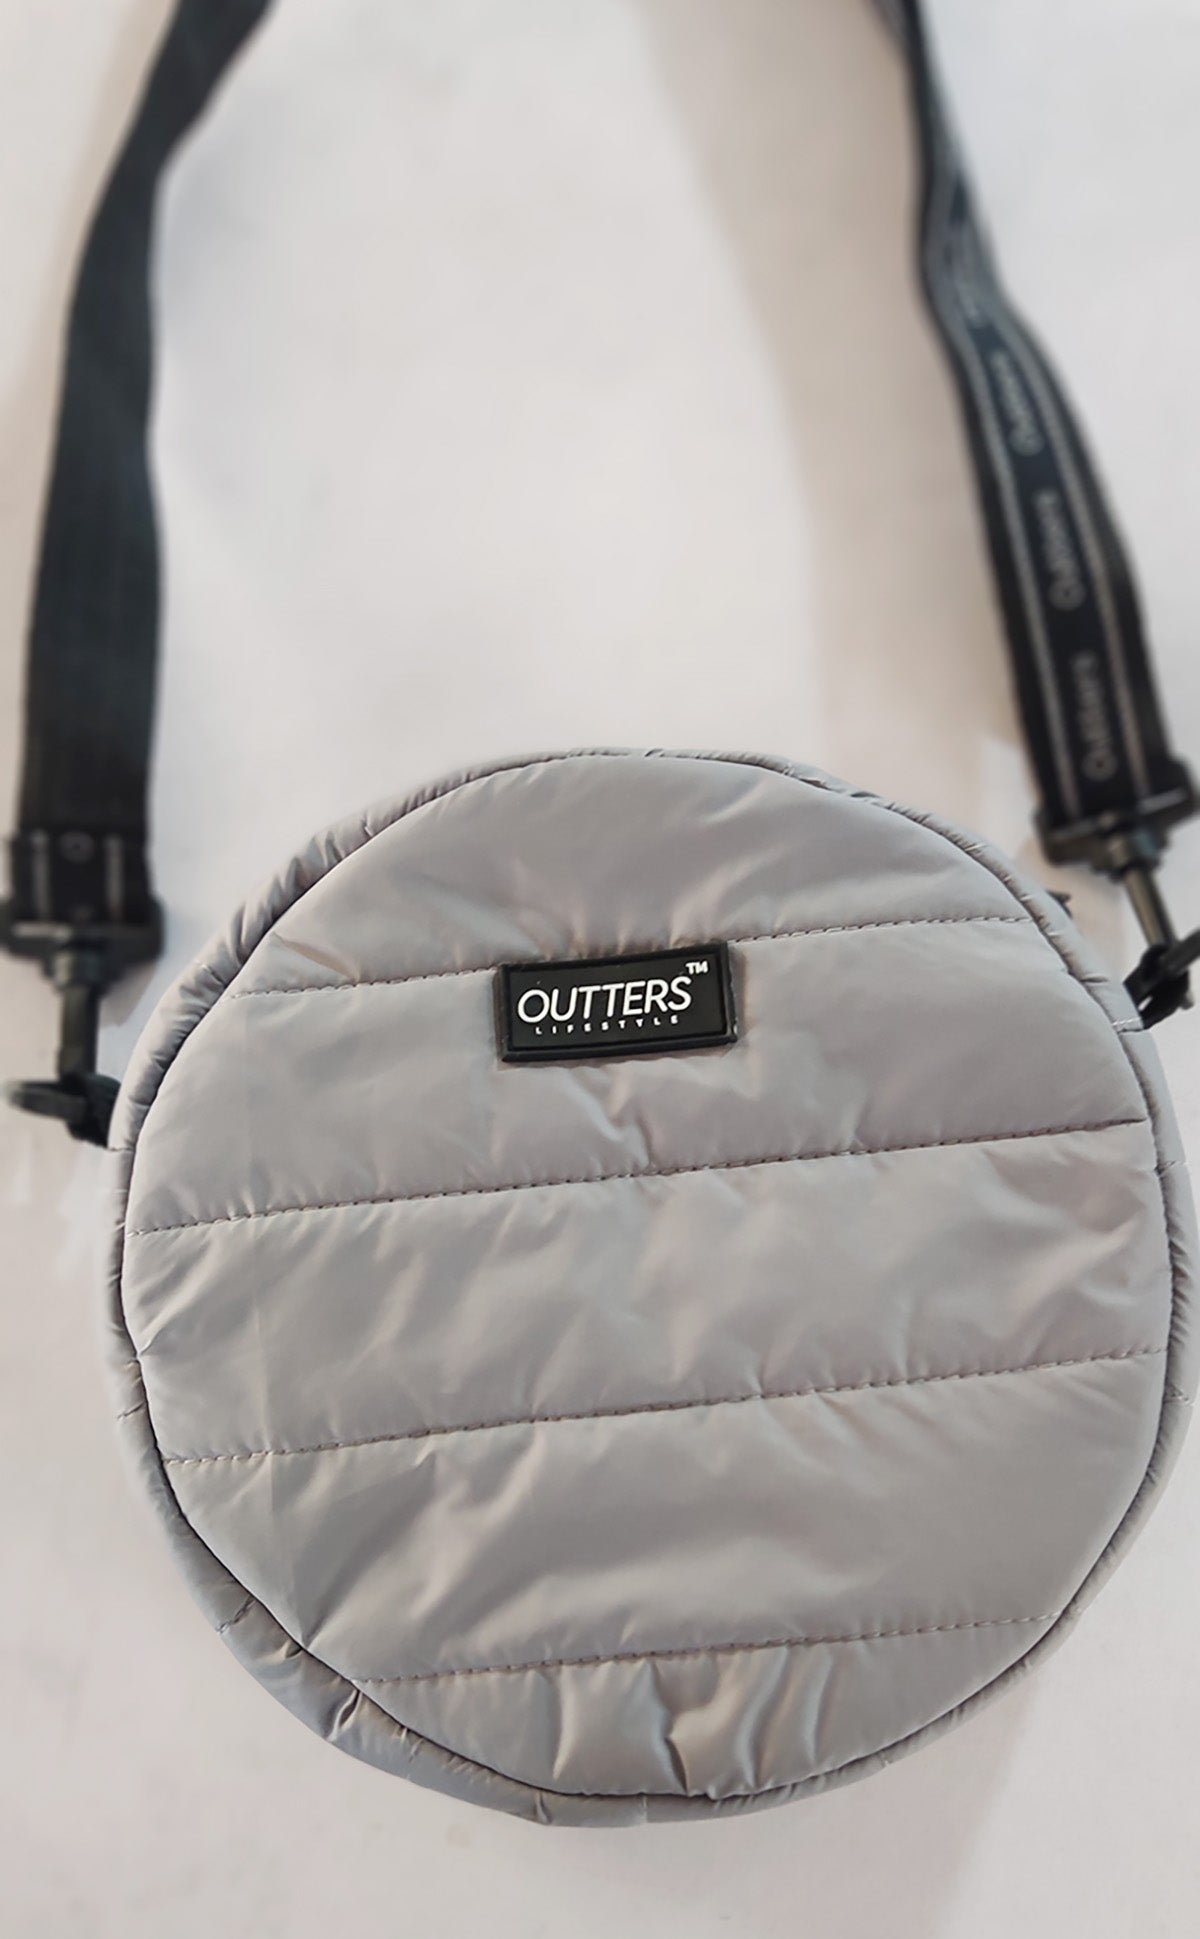 Outters Crossbody round puffer Bag unisex one size